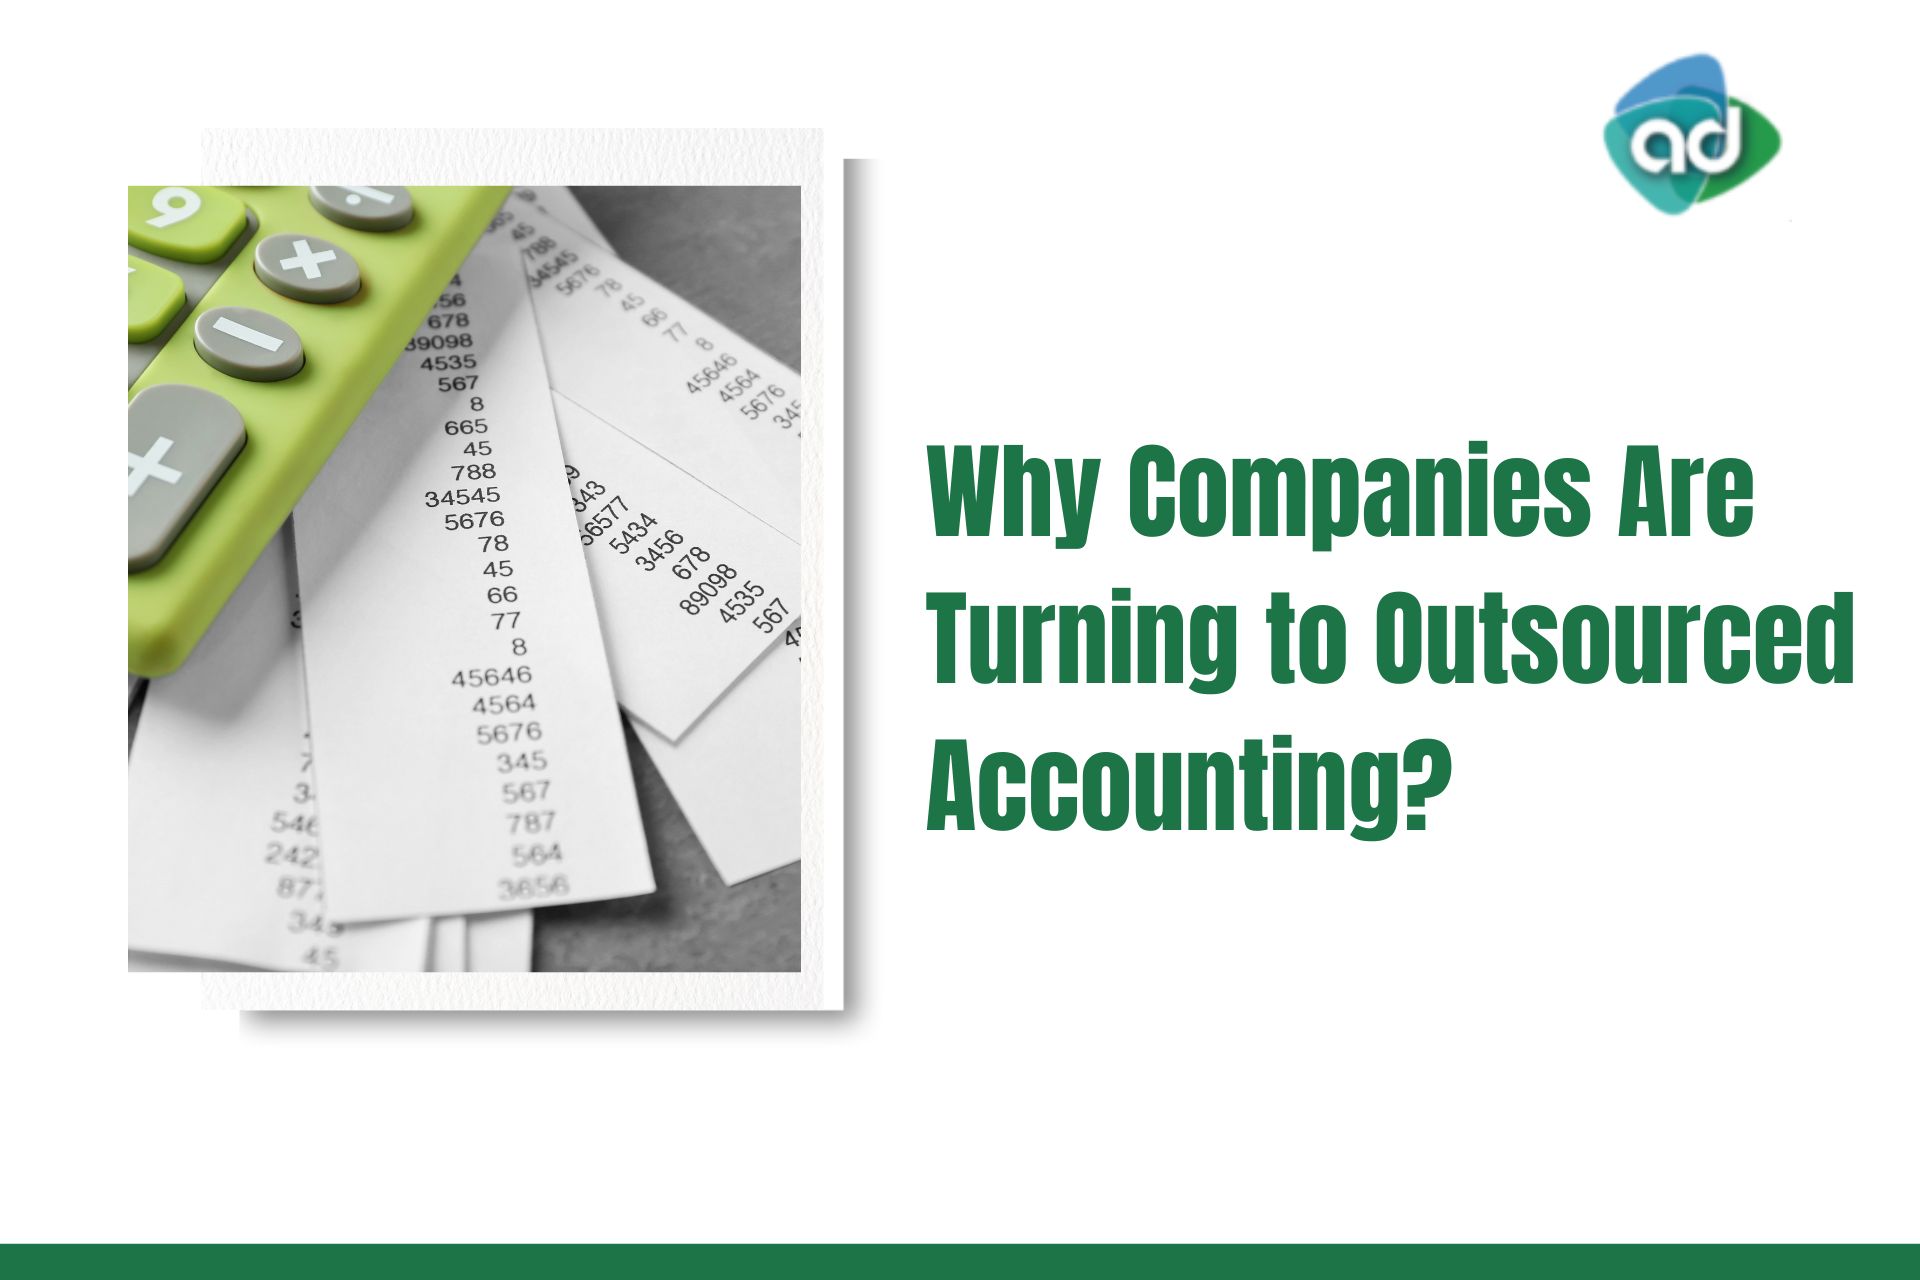 Why Companies Are Turning to Outsourced Accounting?